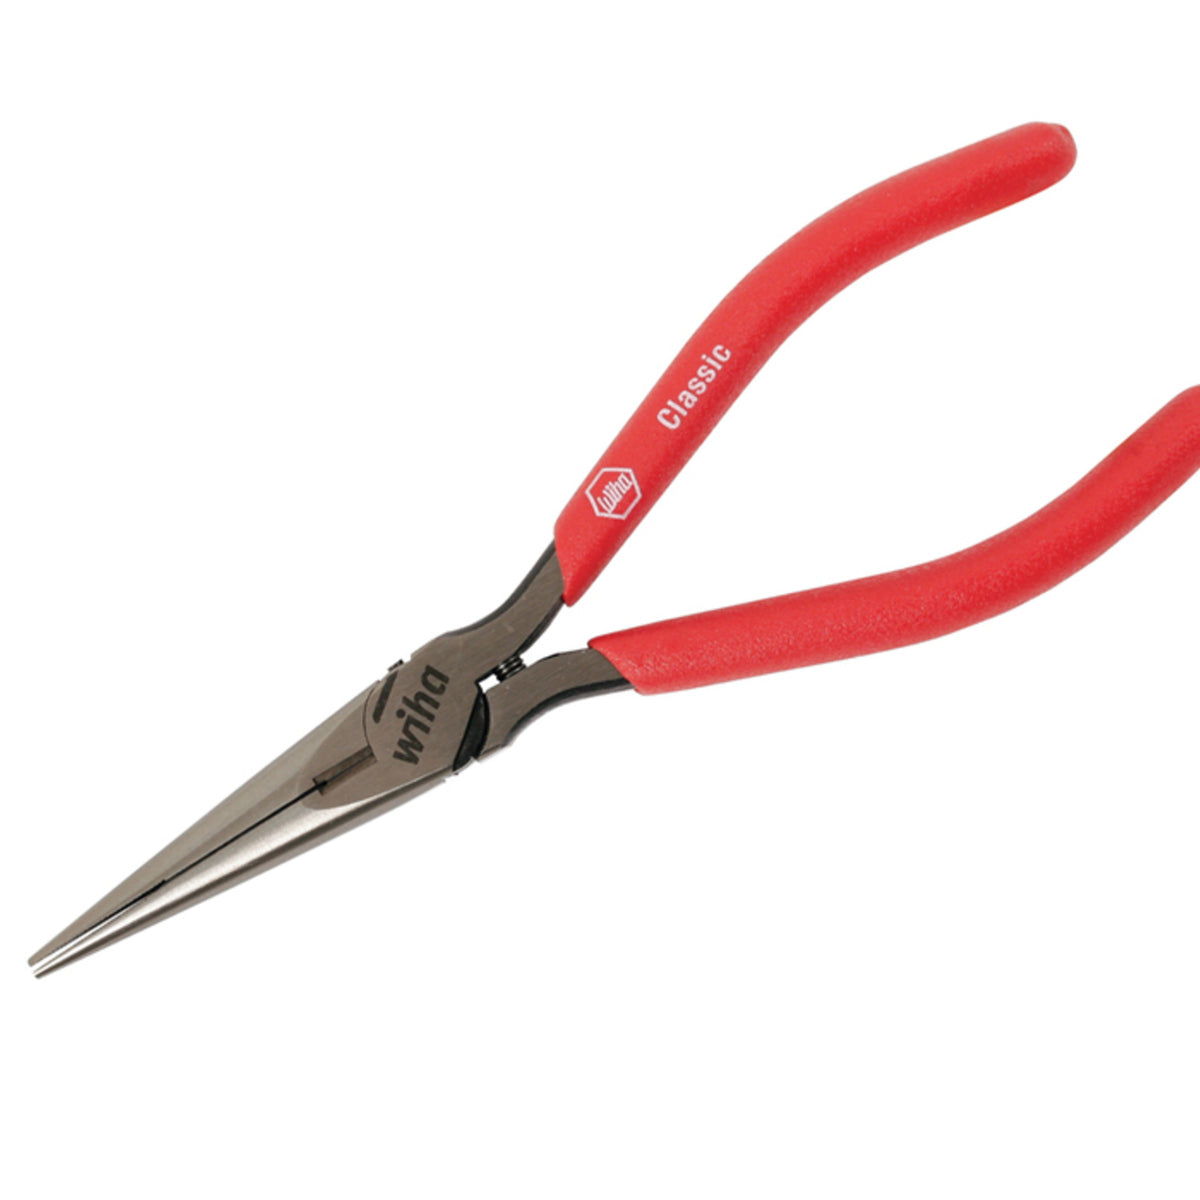 Serrated Long Nose Pliers with Cutter Length 5 Inches | Esslinger